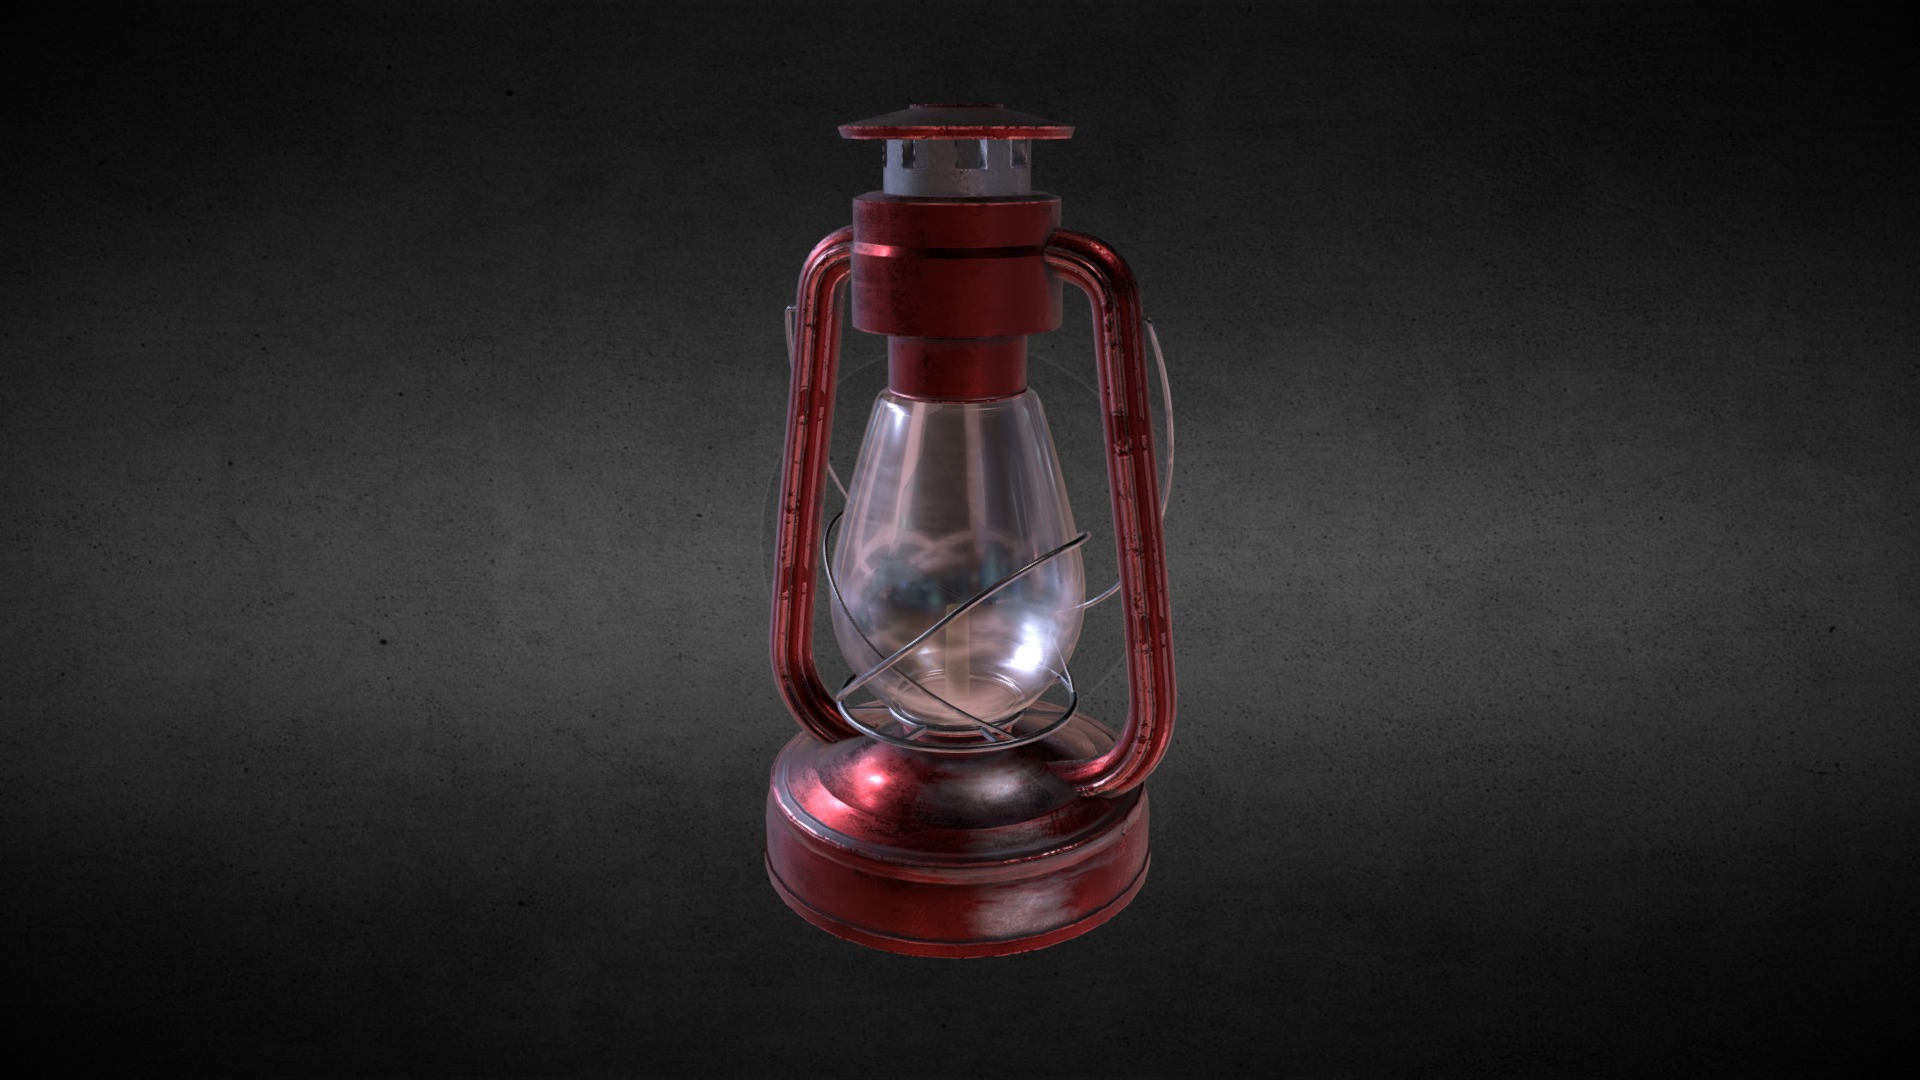 3D model Old Portable Lamp! - This is a 3D model of the Old Portable Lamp!. The 3D model is about a glass bottle with a red cap.